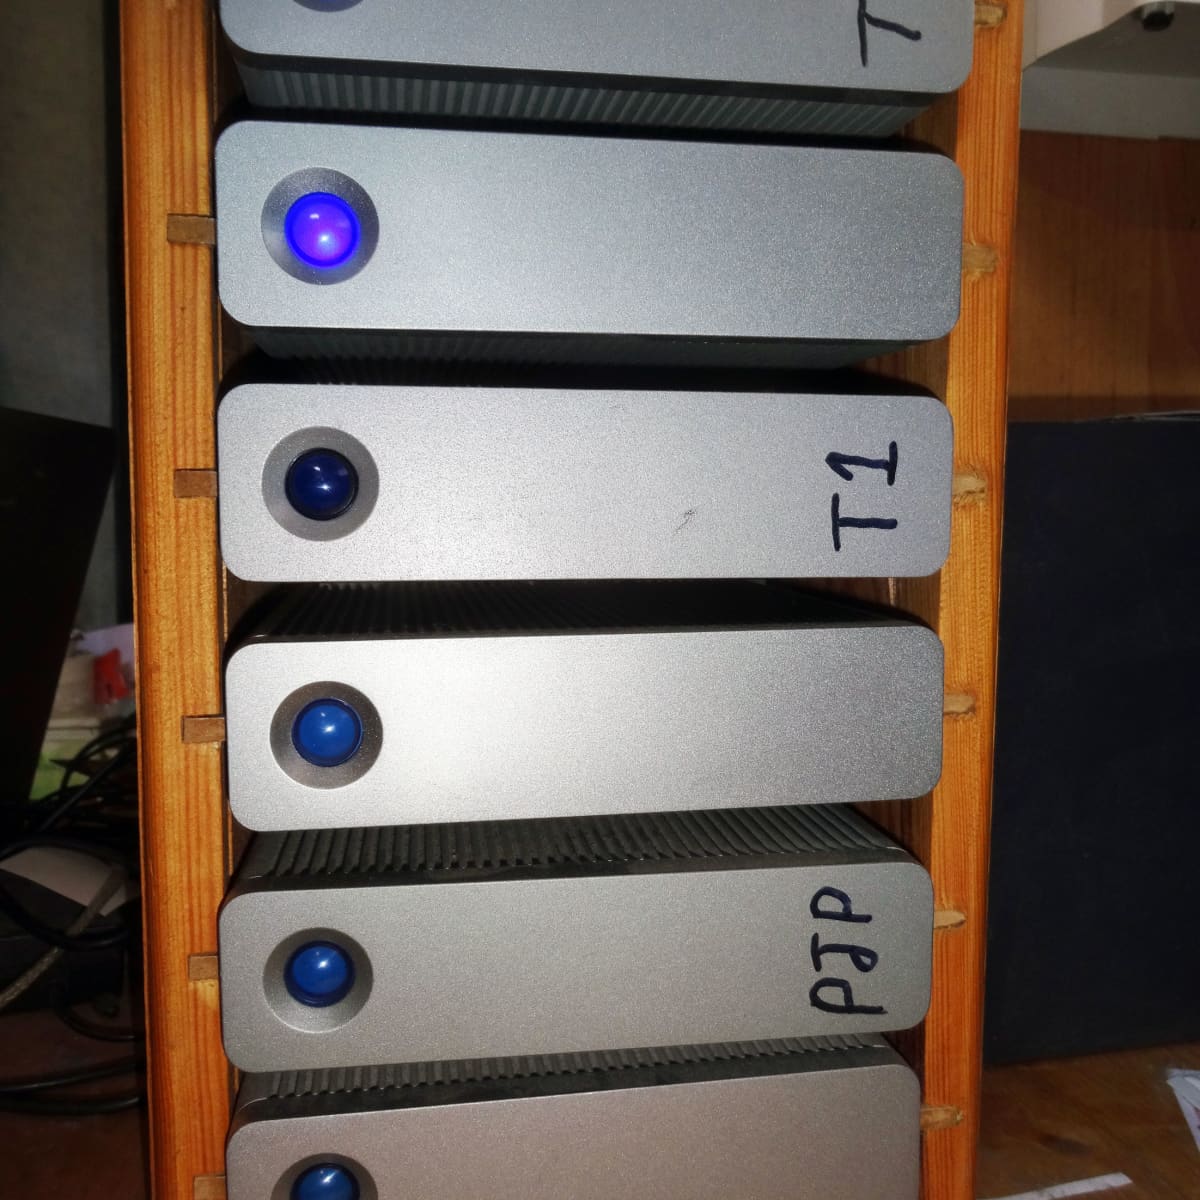 How to Make an HDD Storage Rack From for External Hard - FeltMagnet